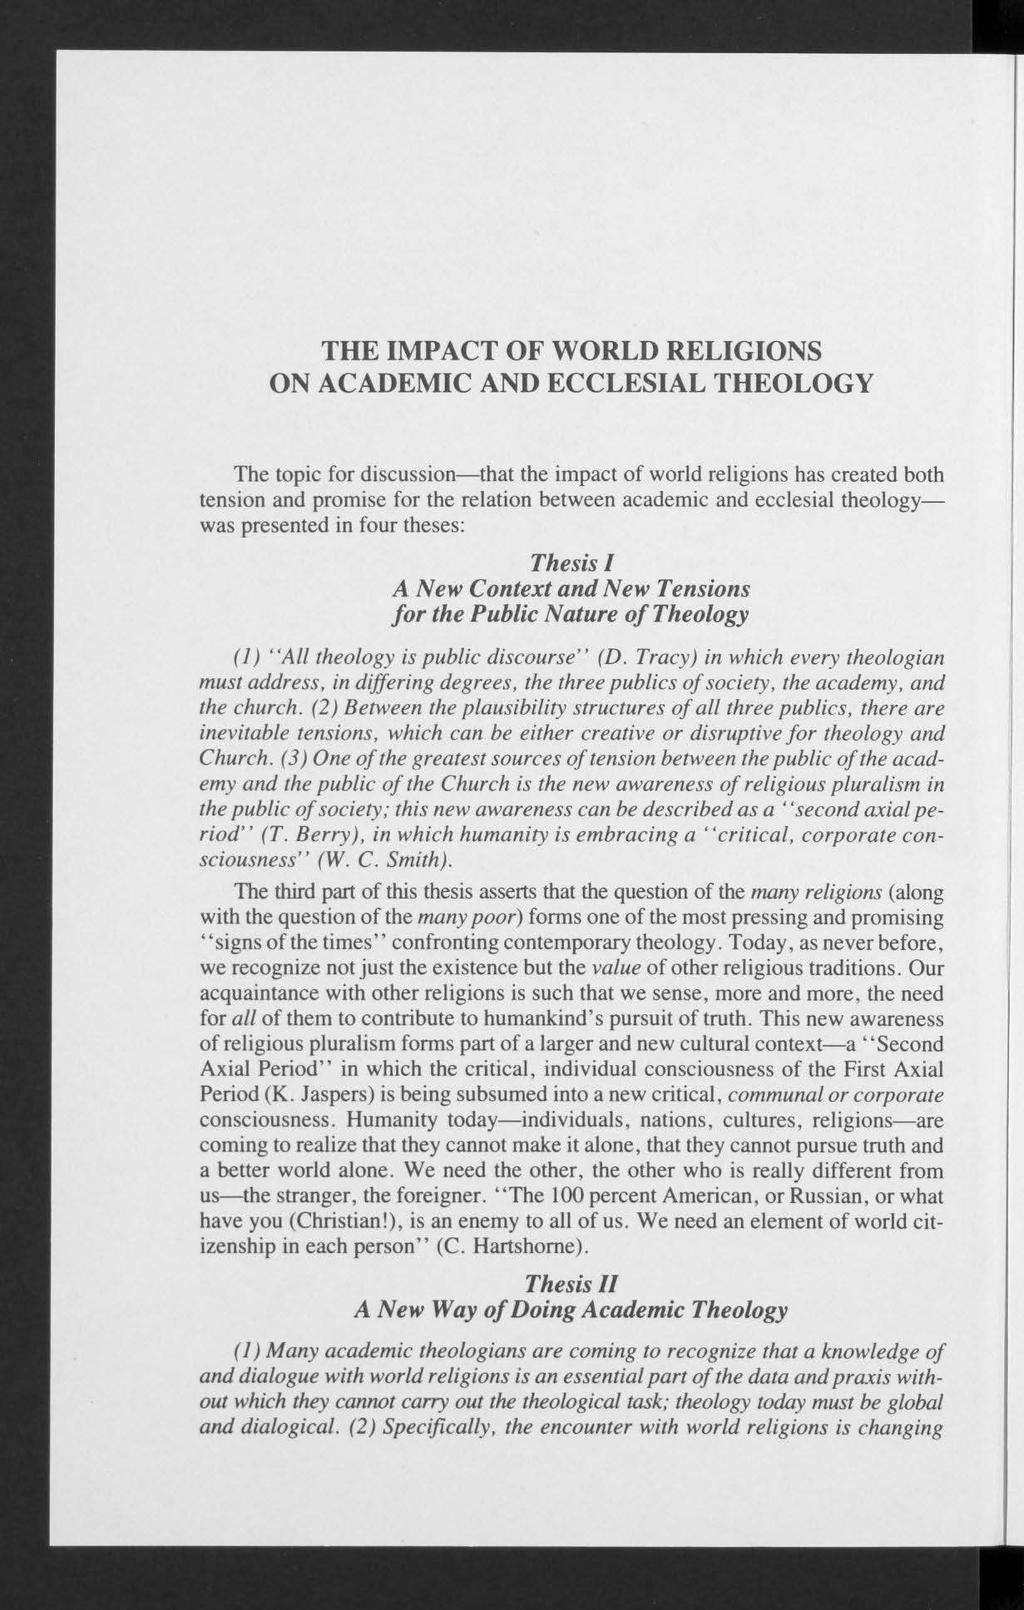 THE IMPACT OF WORLD RELIGIONS ON ACADEMIC AND ECCLESIAL THEOLOGY The topic for discussion that the impact of world religions has created both tension and promise for the relation between academic and